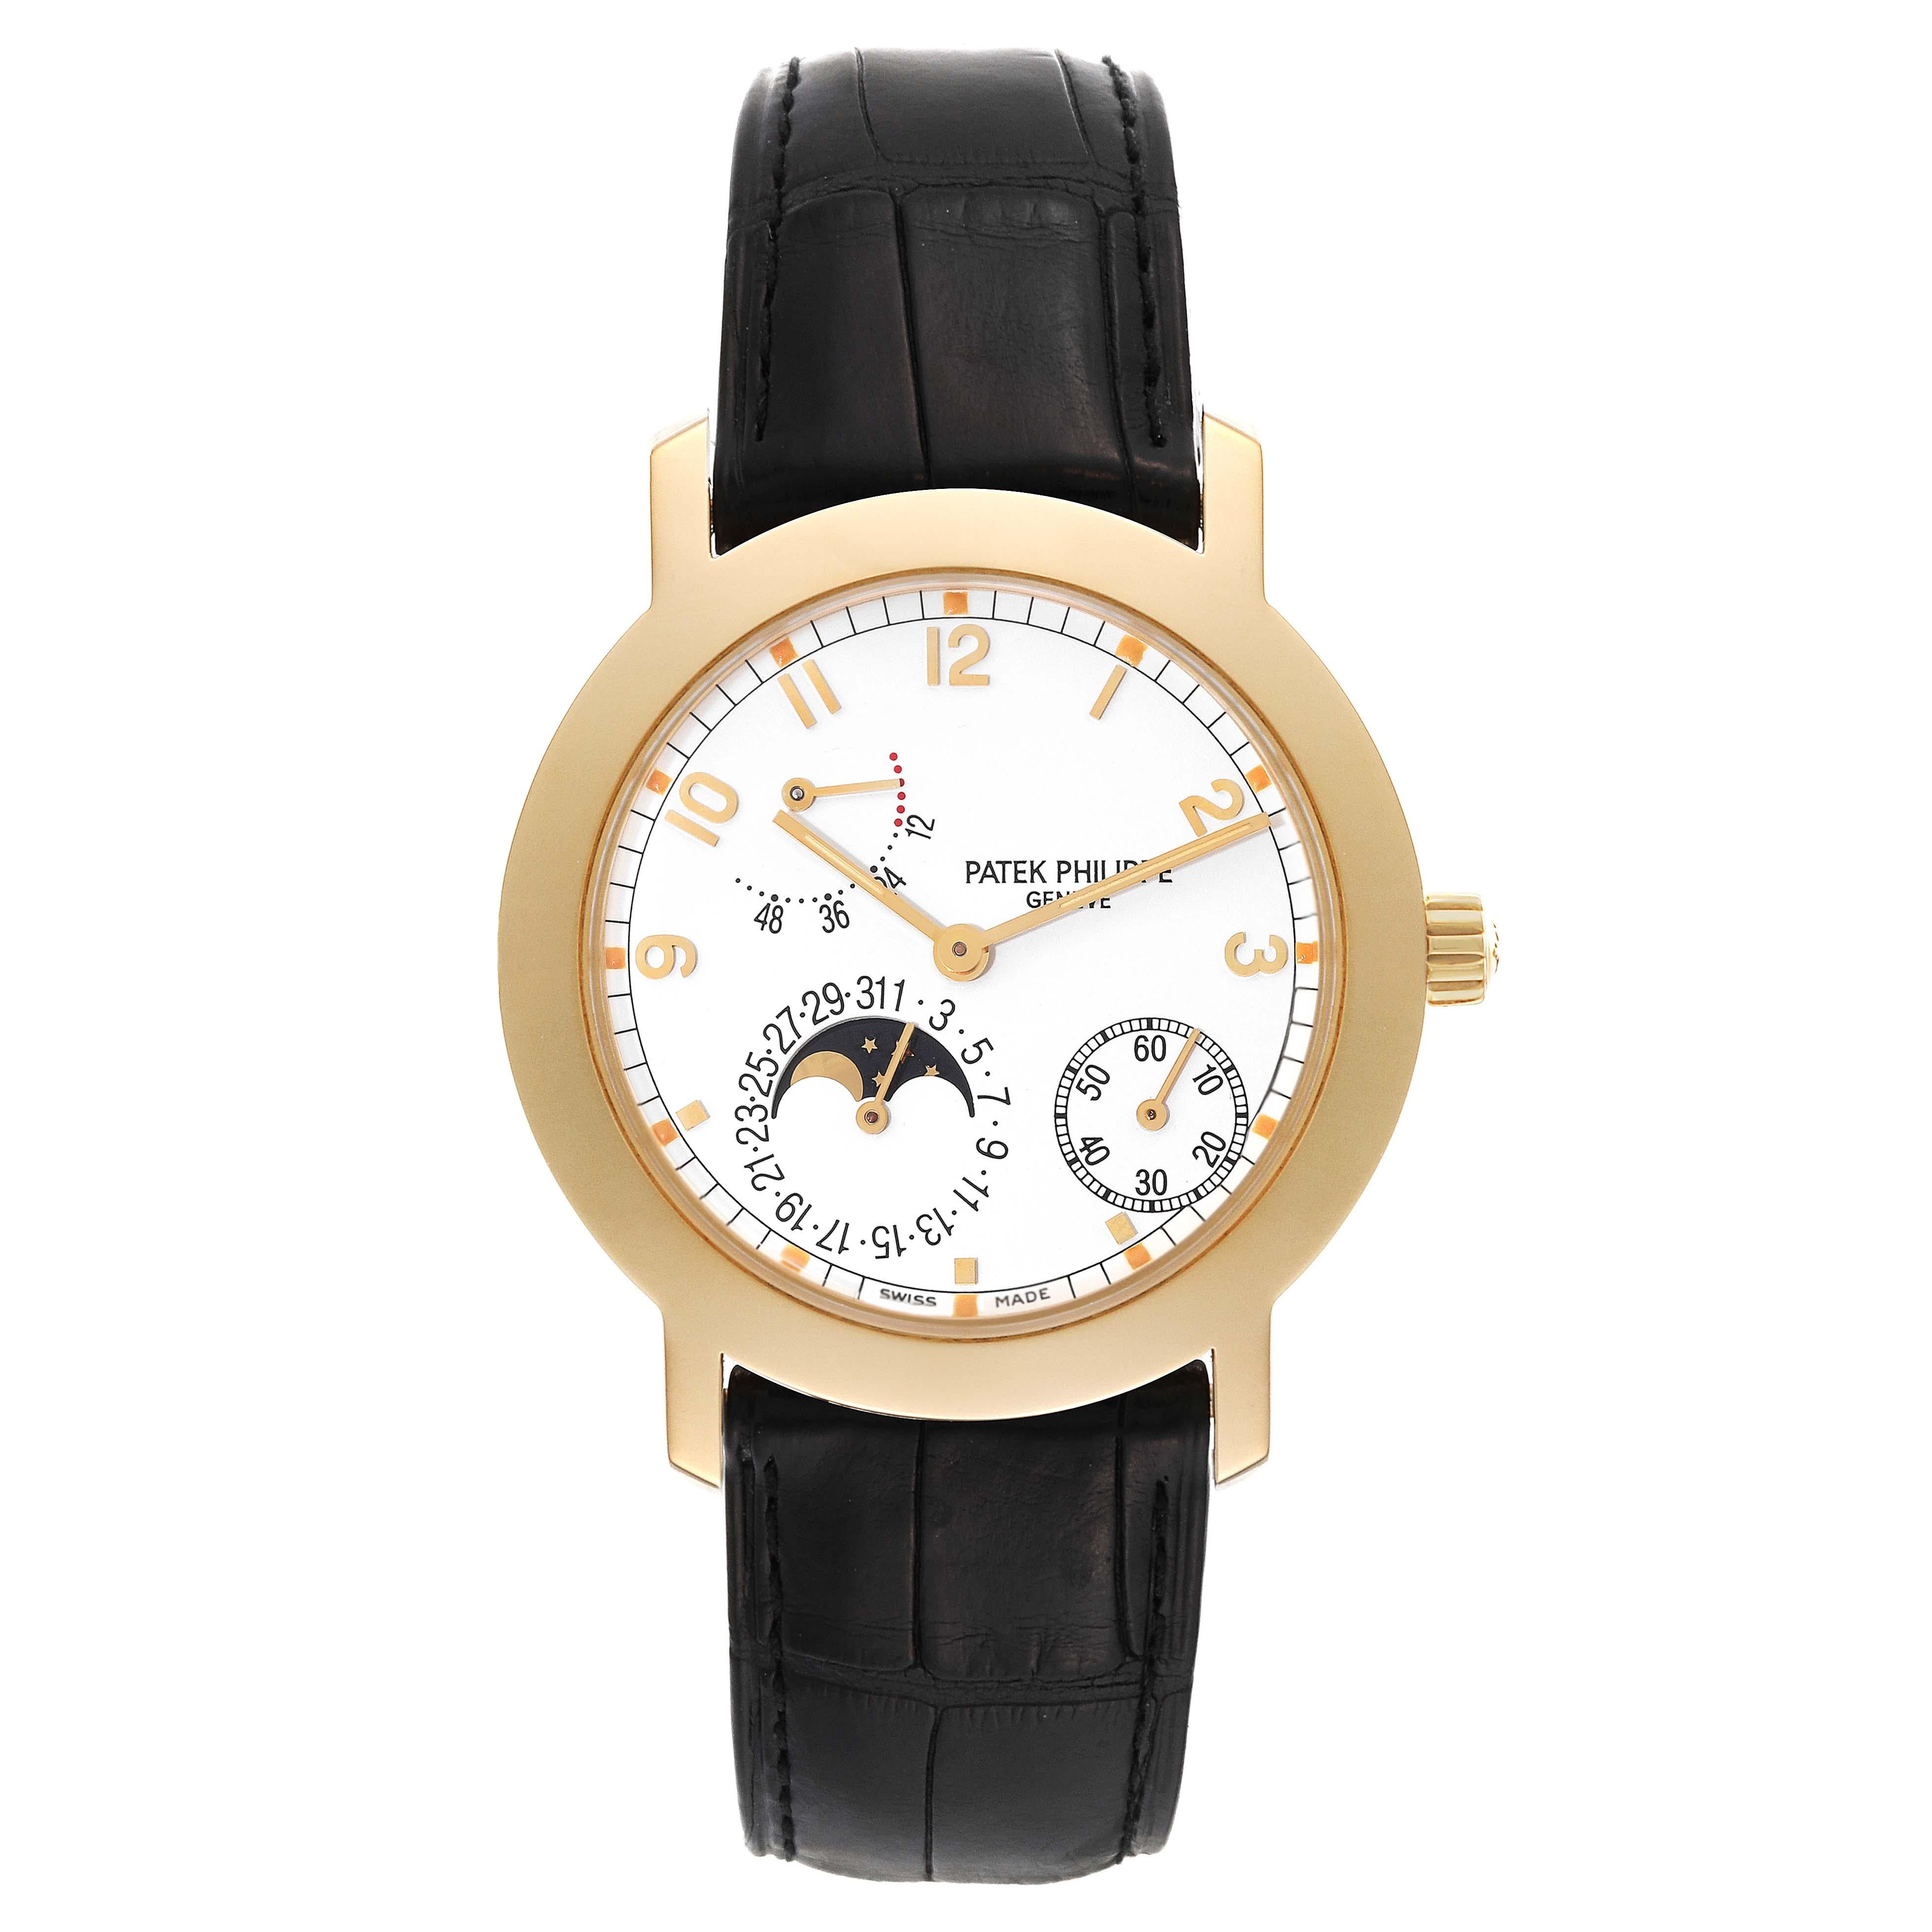 Patek Philippe Moonphase Power Reserve Yellow Gold Mens Watch 5055 Box Papers. Automatic self-winding movement. Self-compensating balance spring, solid gold rotor, 48 hour power reserve and engraved with the Geneva Seal. 18K yellow gold round case